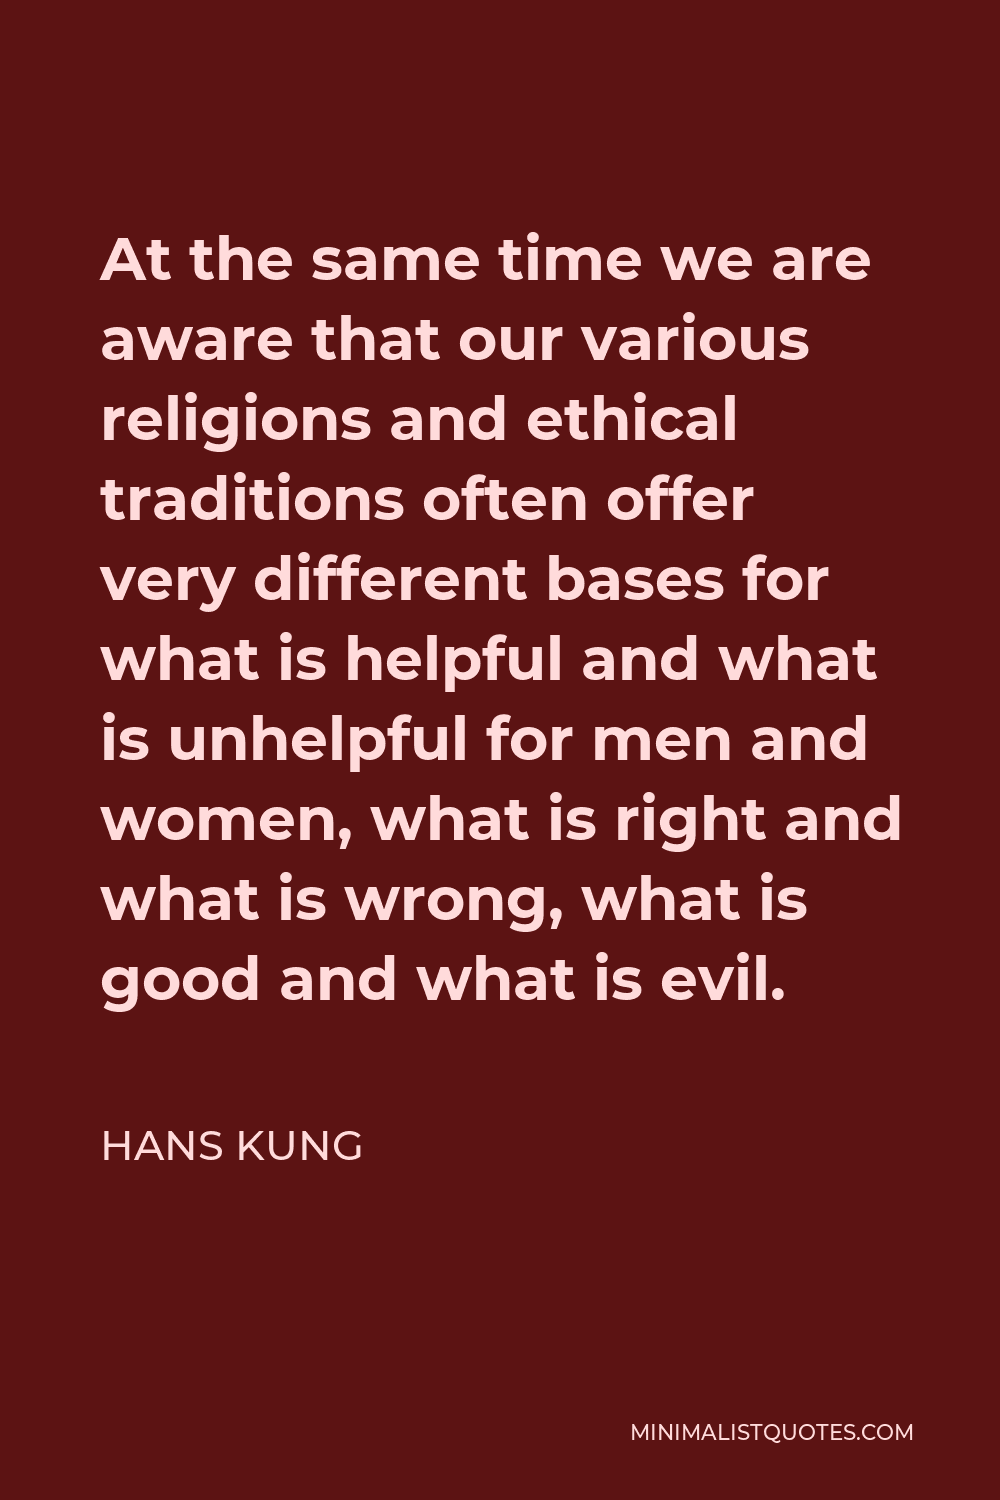 Hans Kung Quote - At the same time we are aware that our various religions and ethical traditions often offer very different bases for what is helpful and what is unhelpful for men and women, what is right and what is wrong, what is good and what is evil.